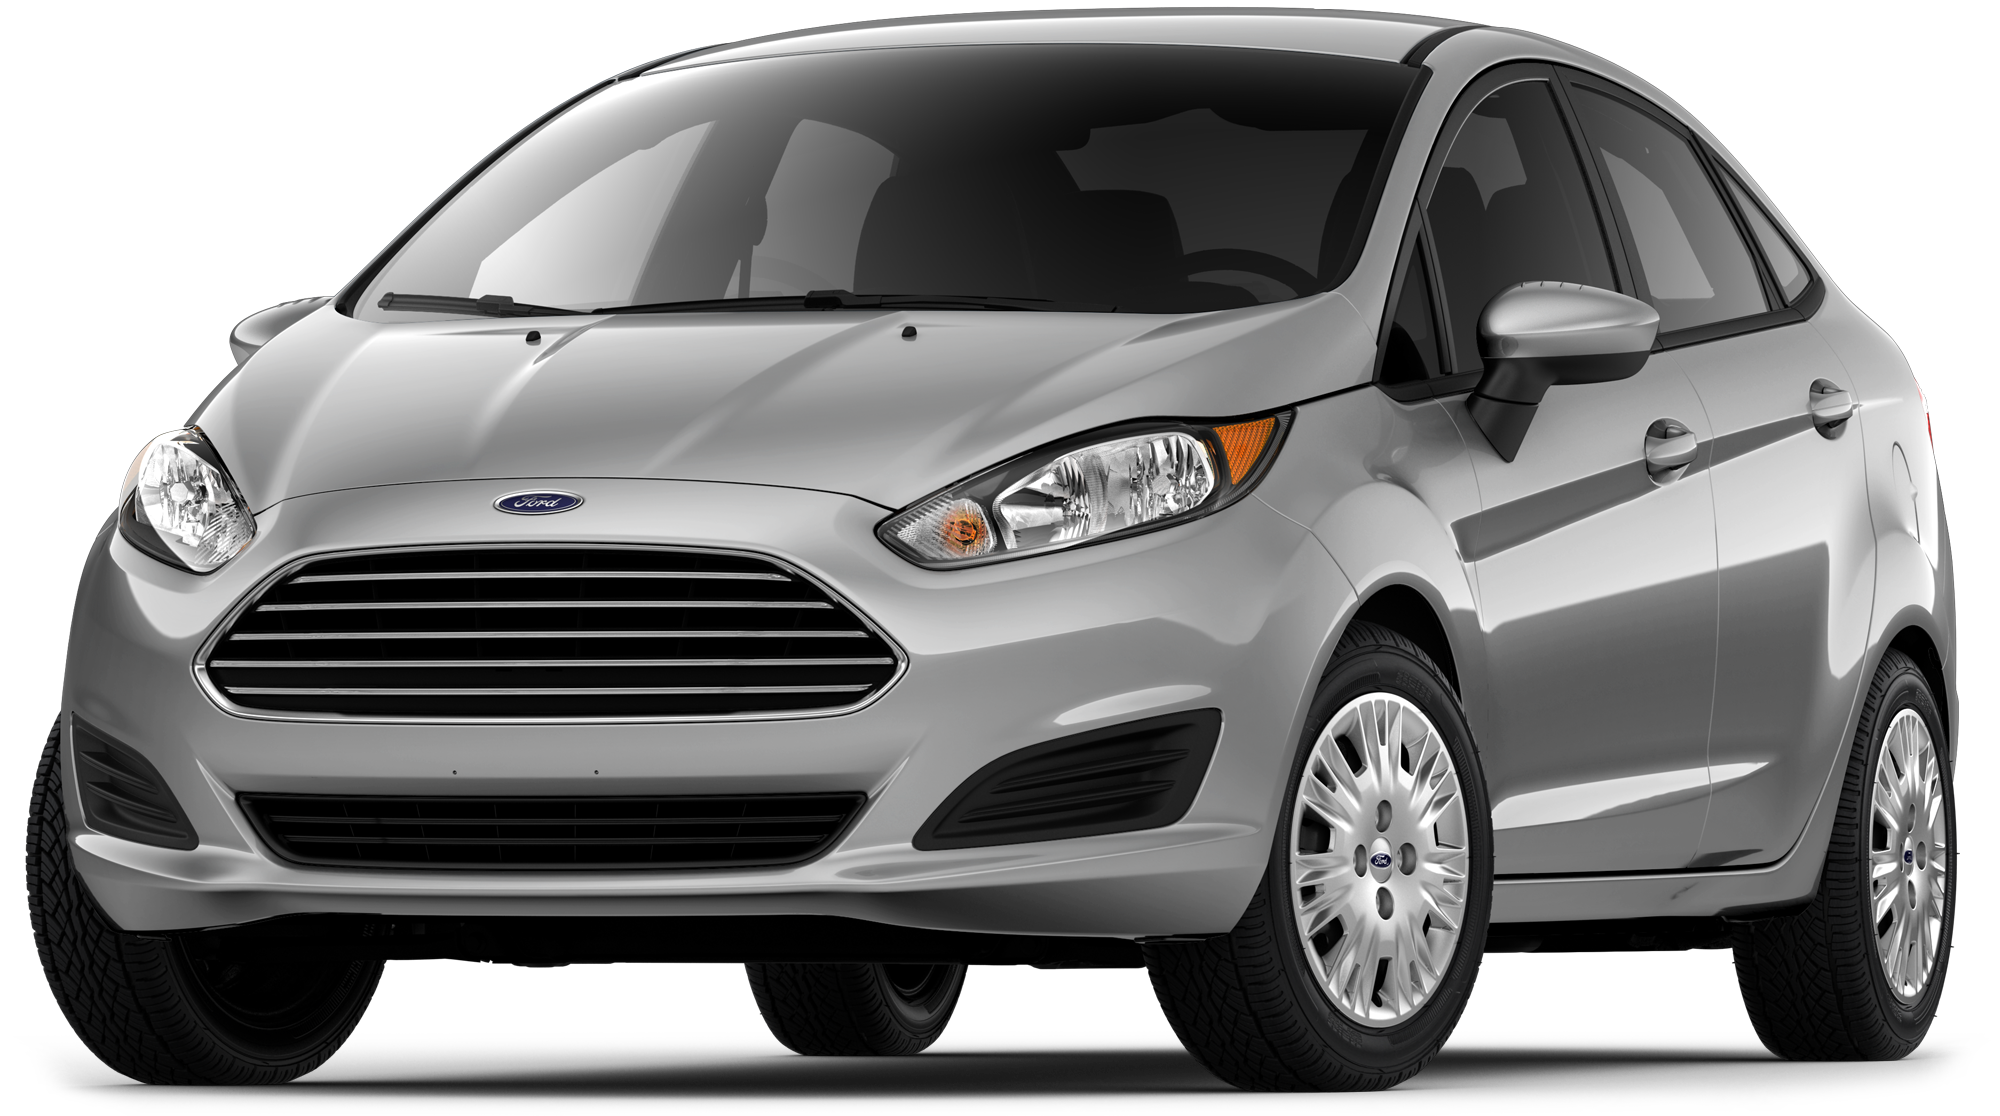 2019 Ford Fiesta Incentives, Specials & Offers in Norwalk OH